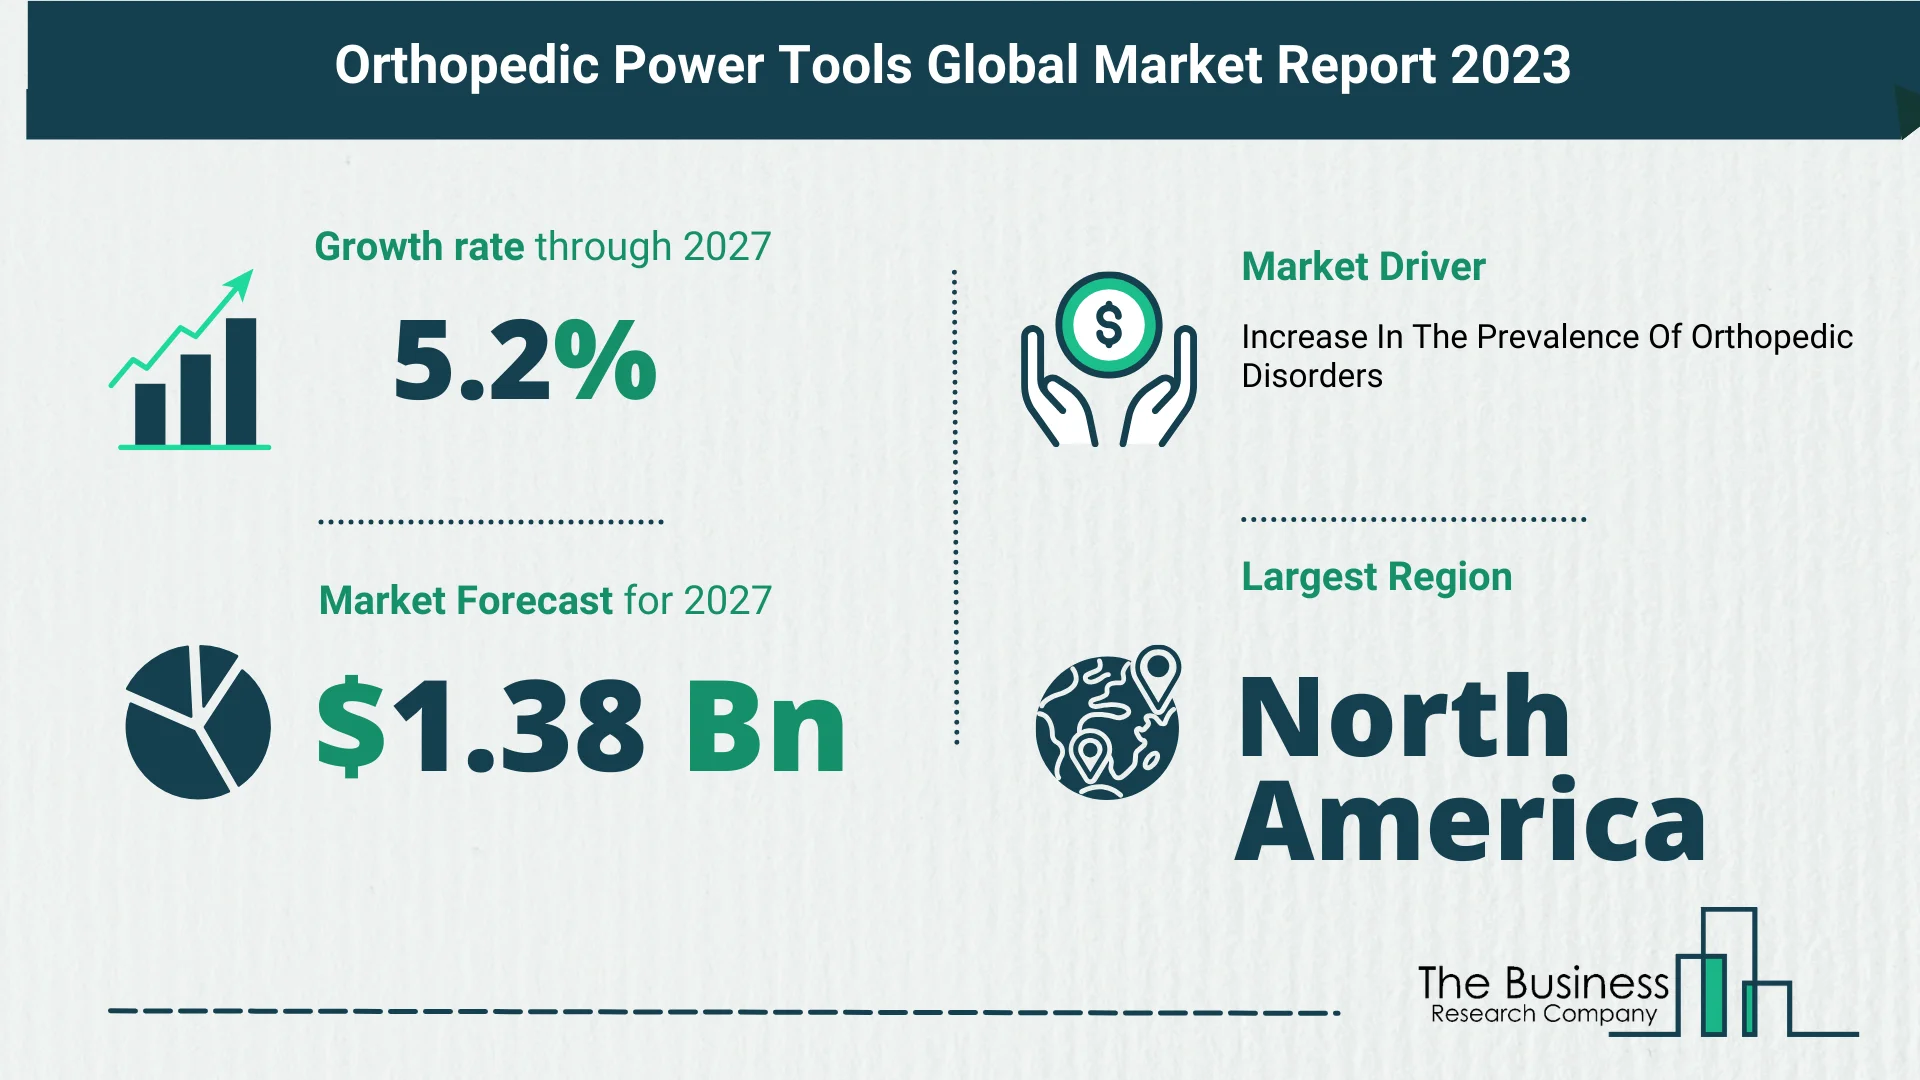 What Is TheForecast Growth Rate For The Orthopedic Power Tools Market?